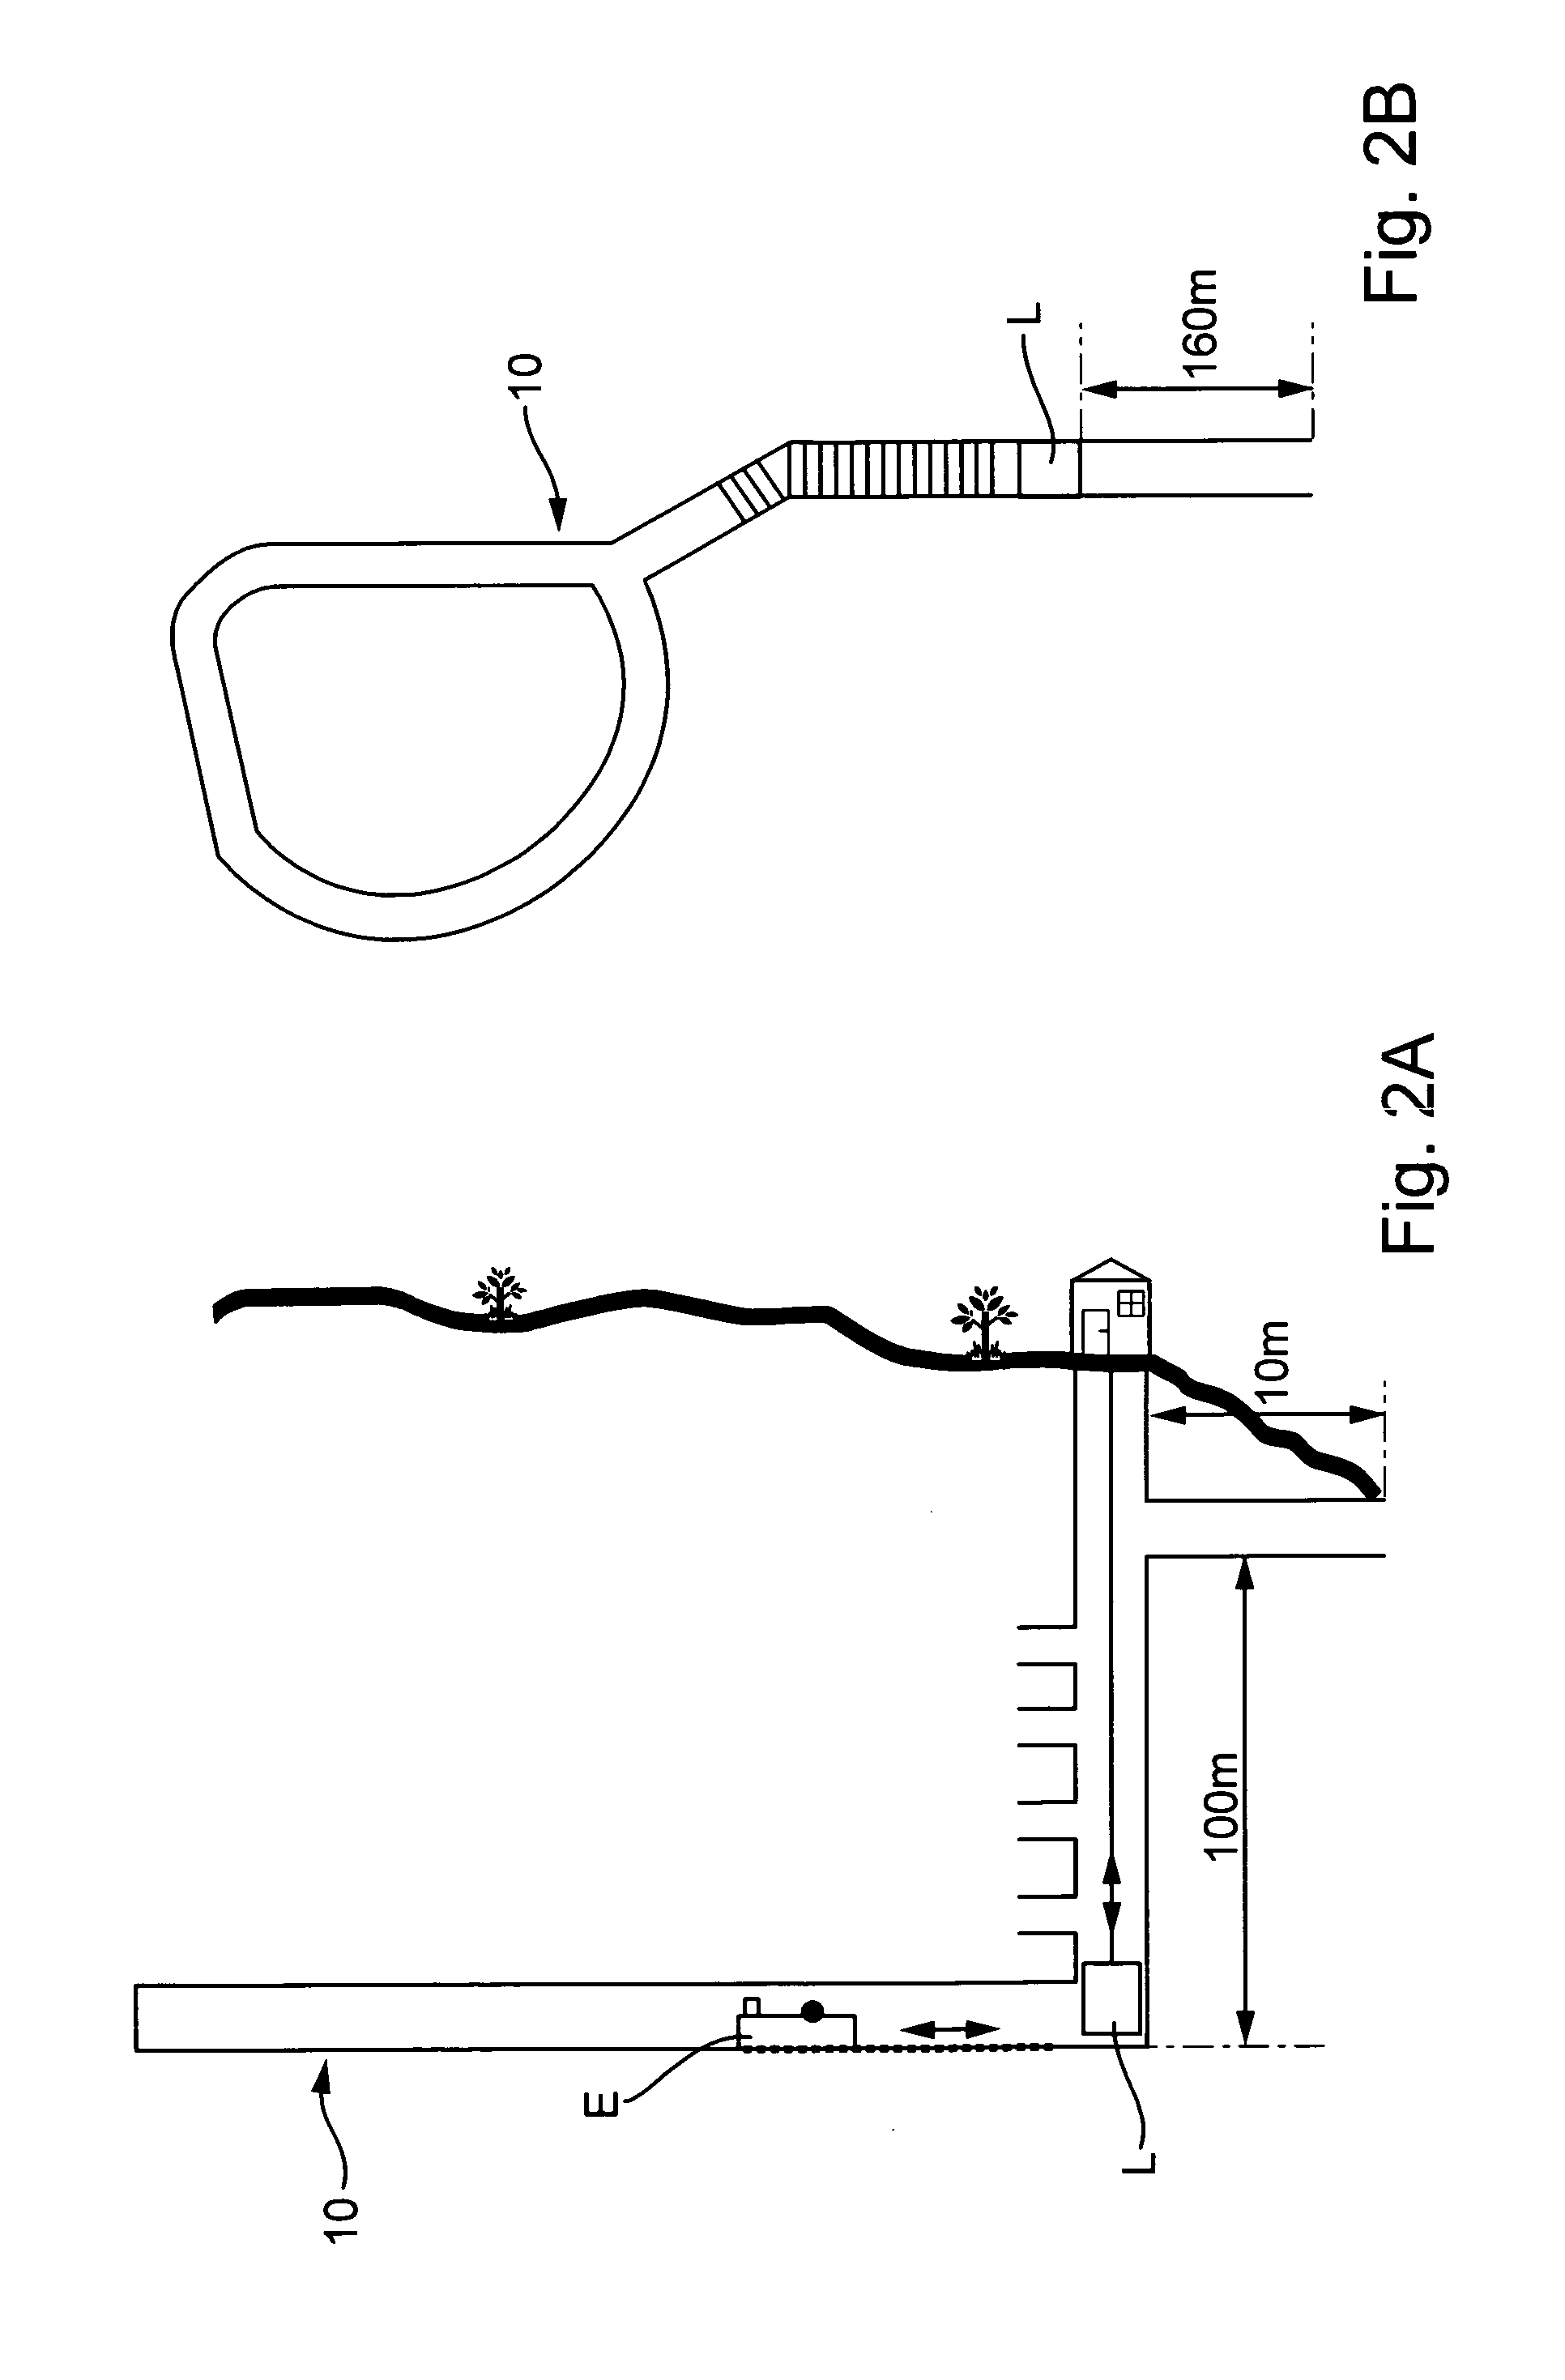 Position-Monitoring Device for Persons